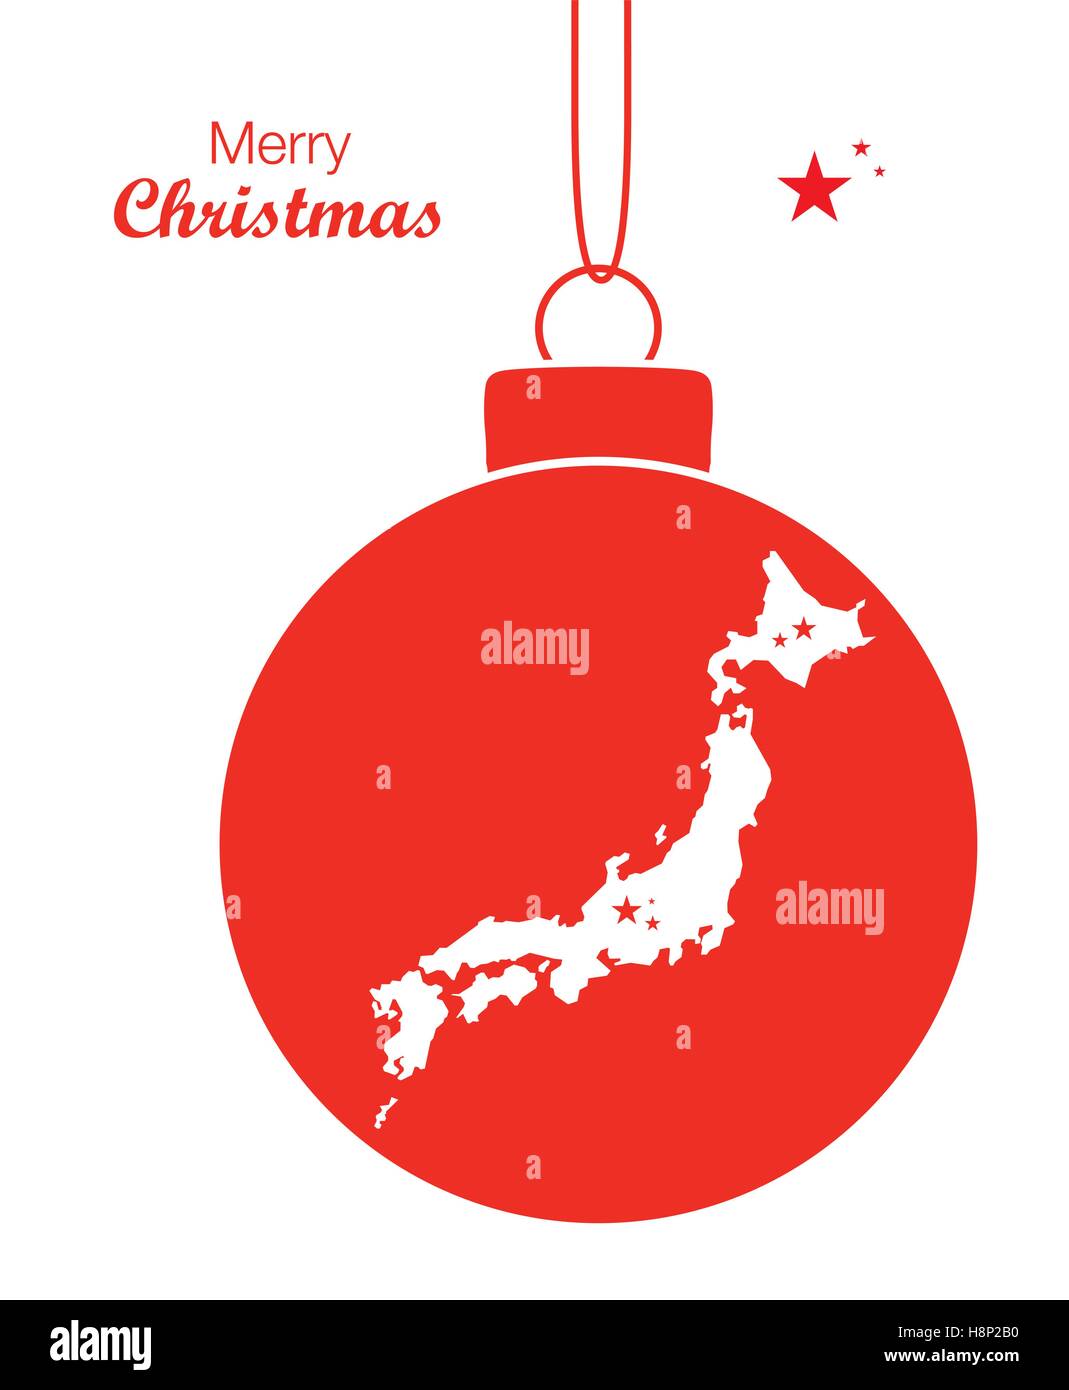 Merry Christmas illustration theme with map of Japan Stock Vector